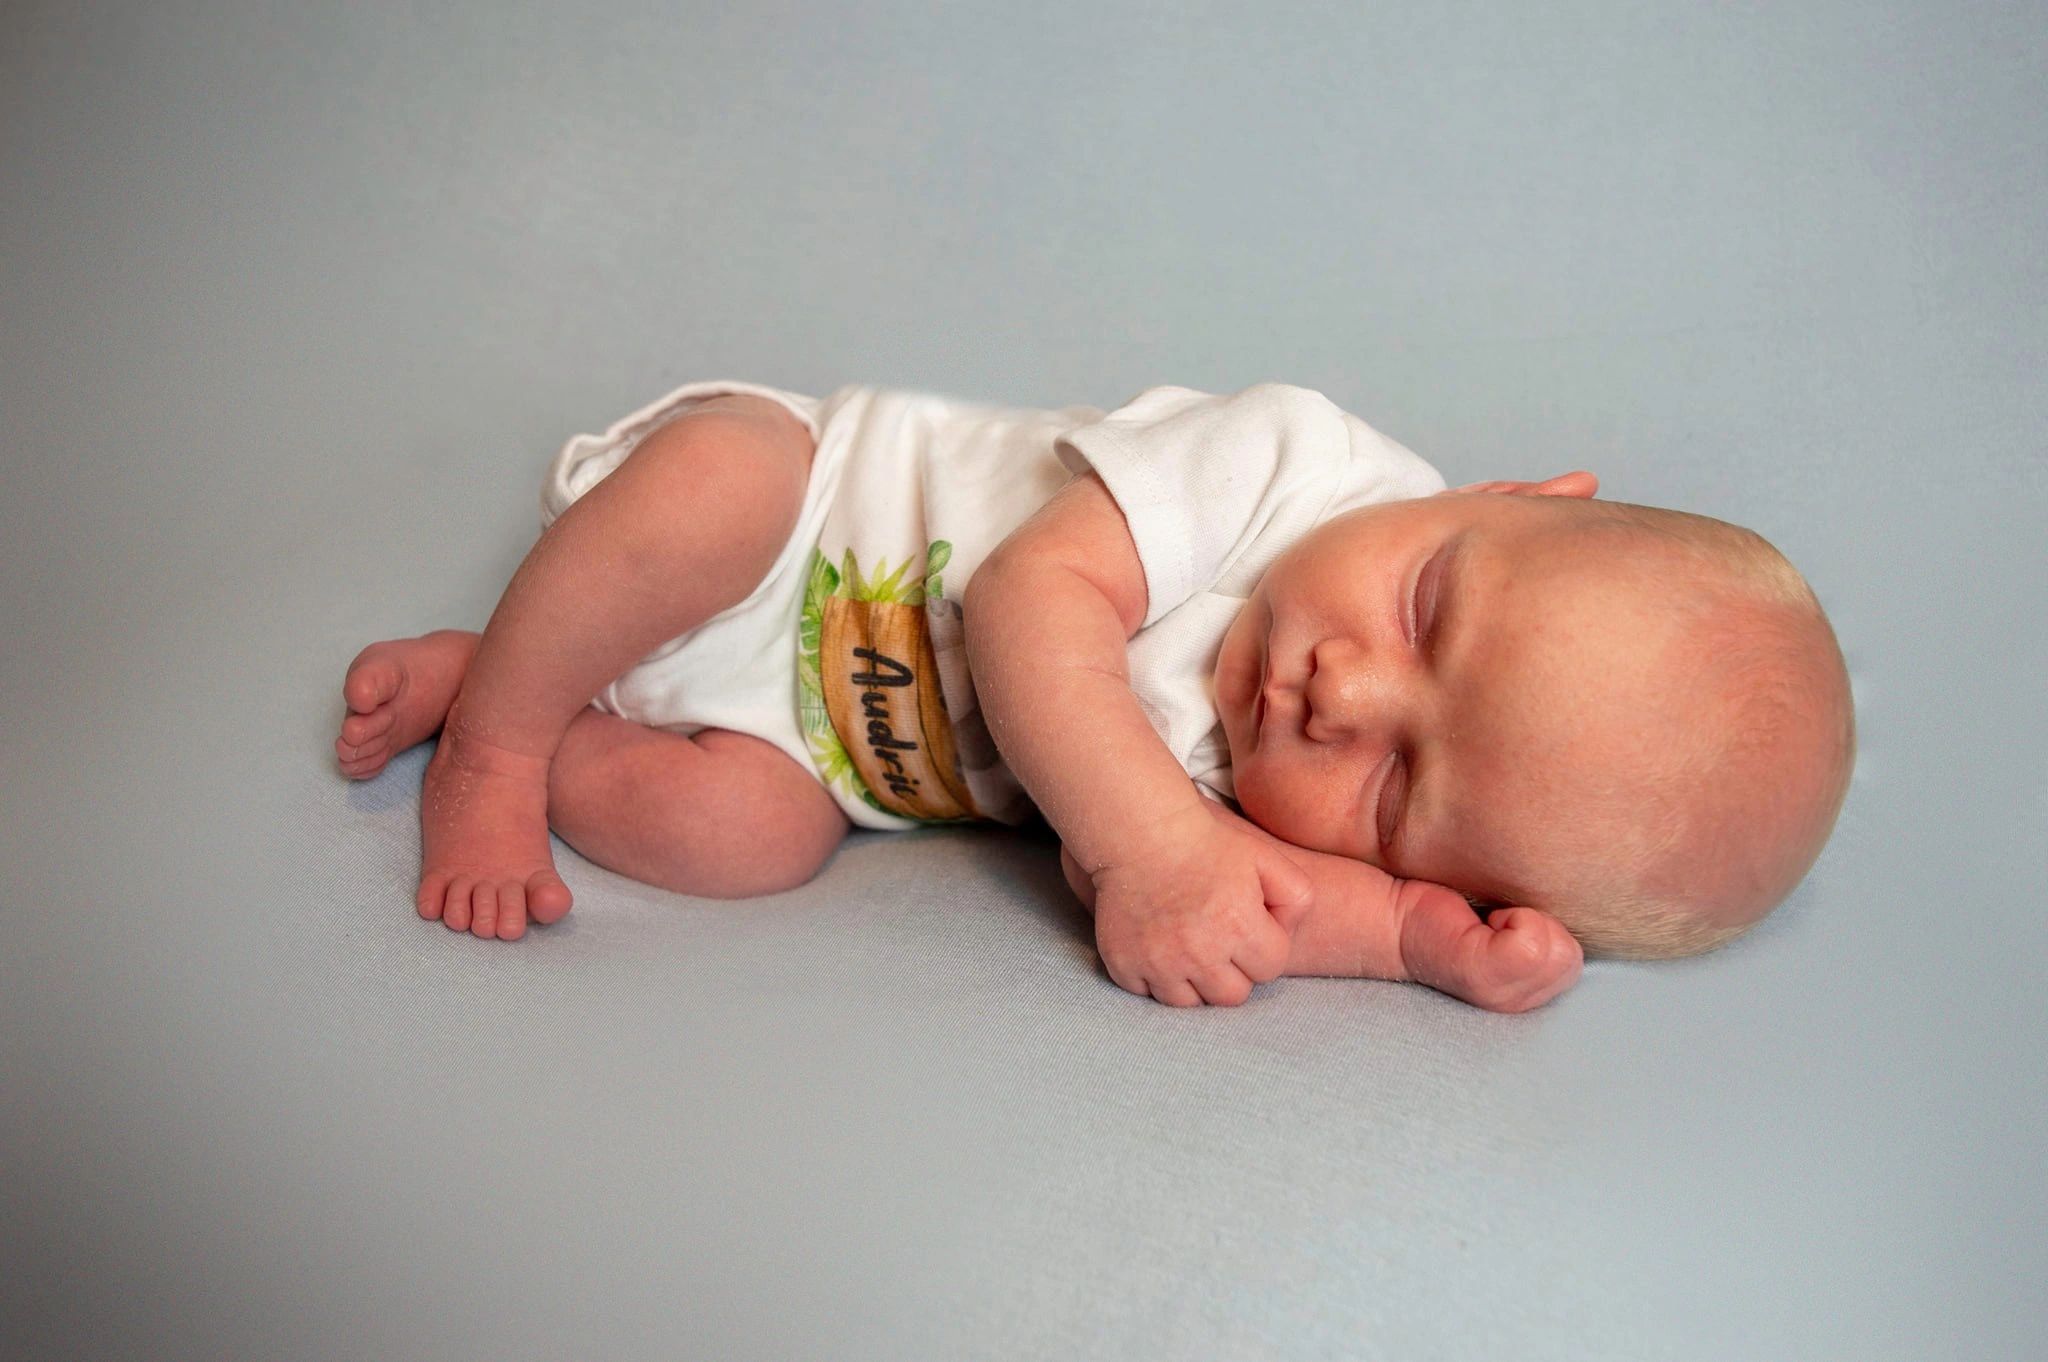 Infant baby boy wearing white one piece, curled up and sleeping.